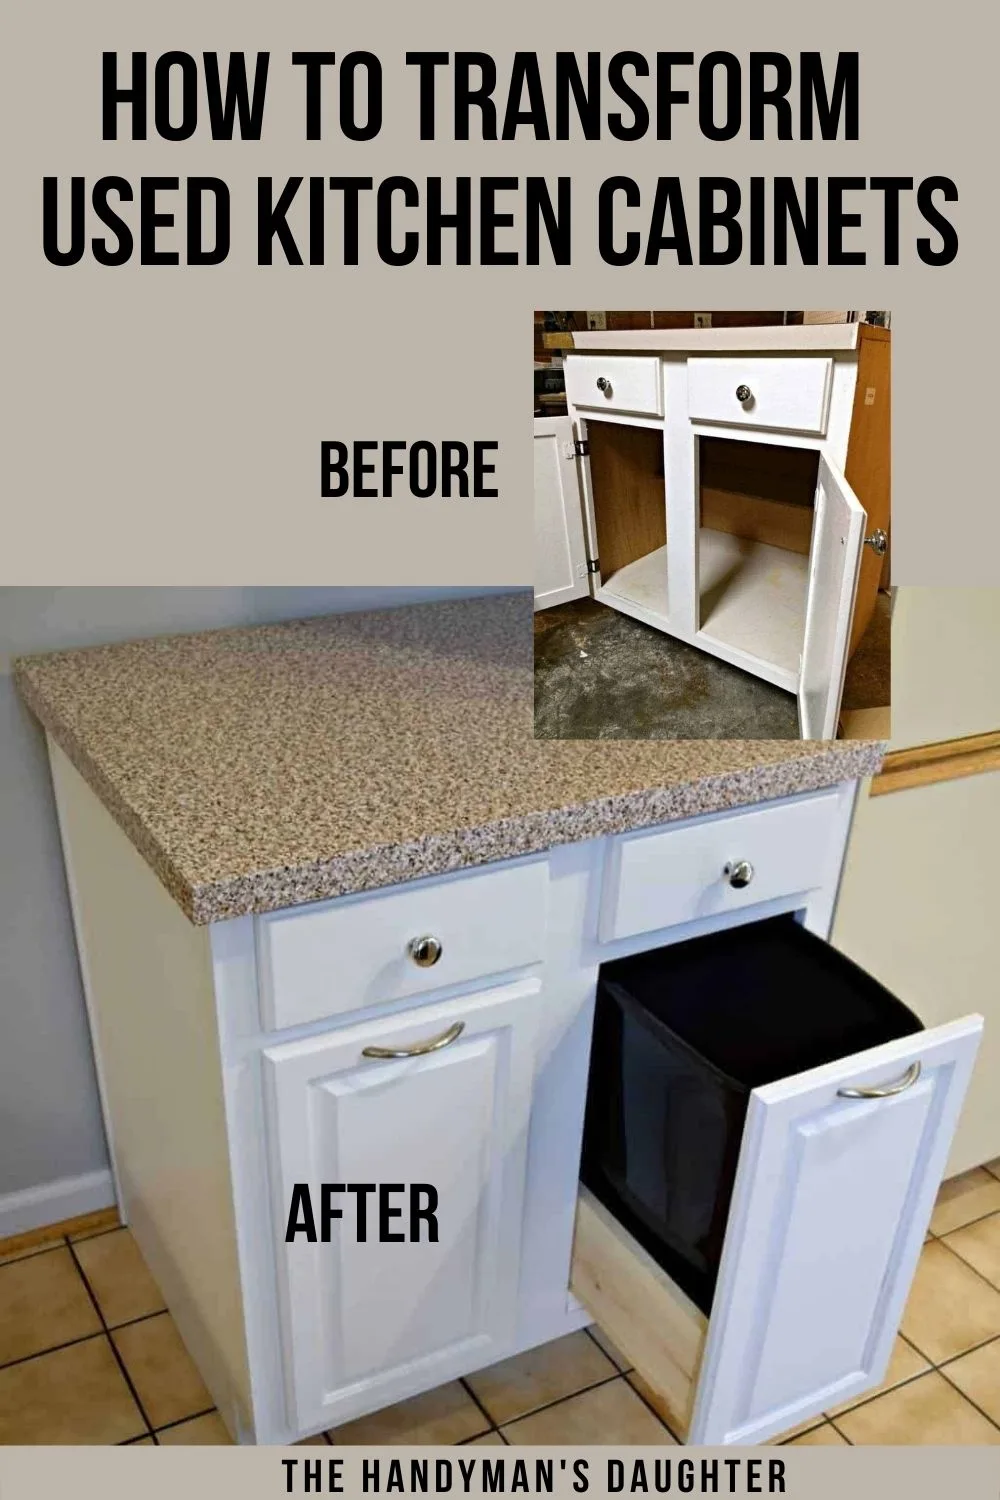 Where to Find Used Kitchen Cabinets and How to Fix Them Up